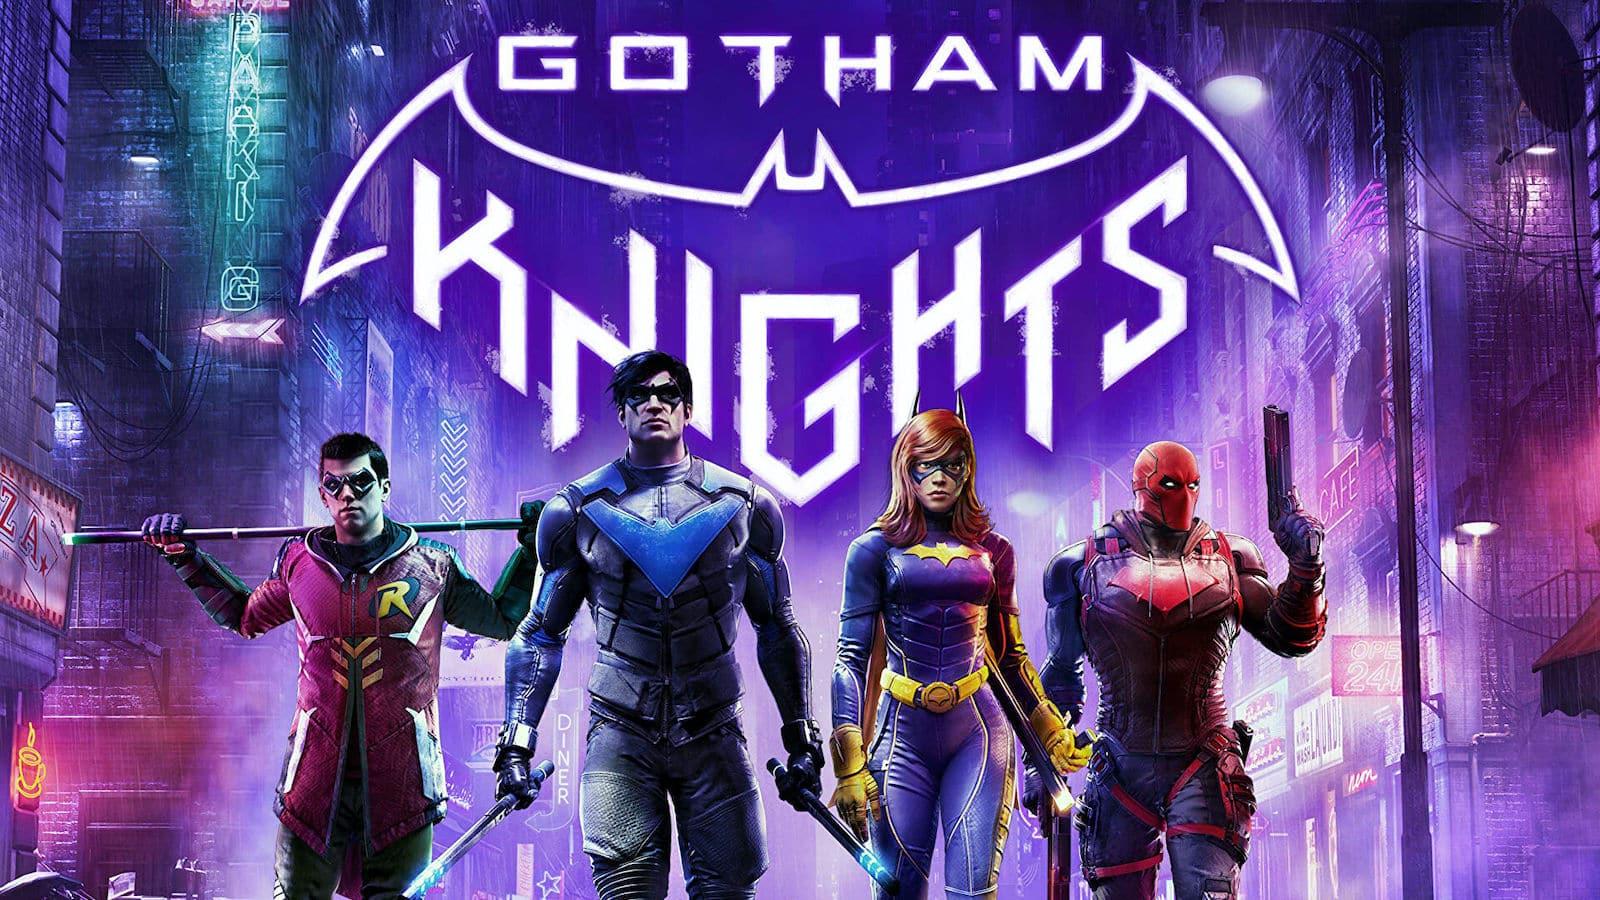 Gotham Knights is not connected to Batman's Arkham Universe